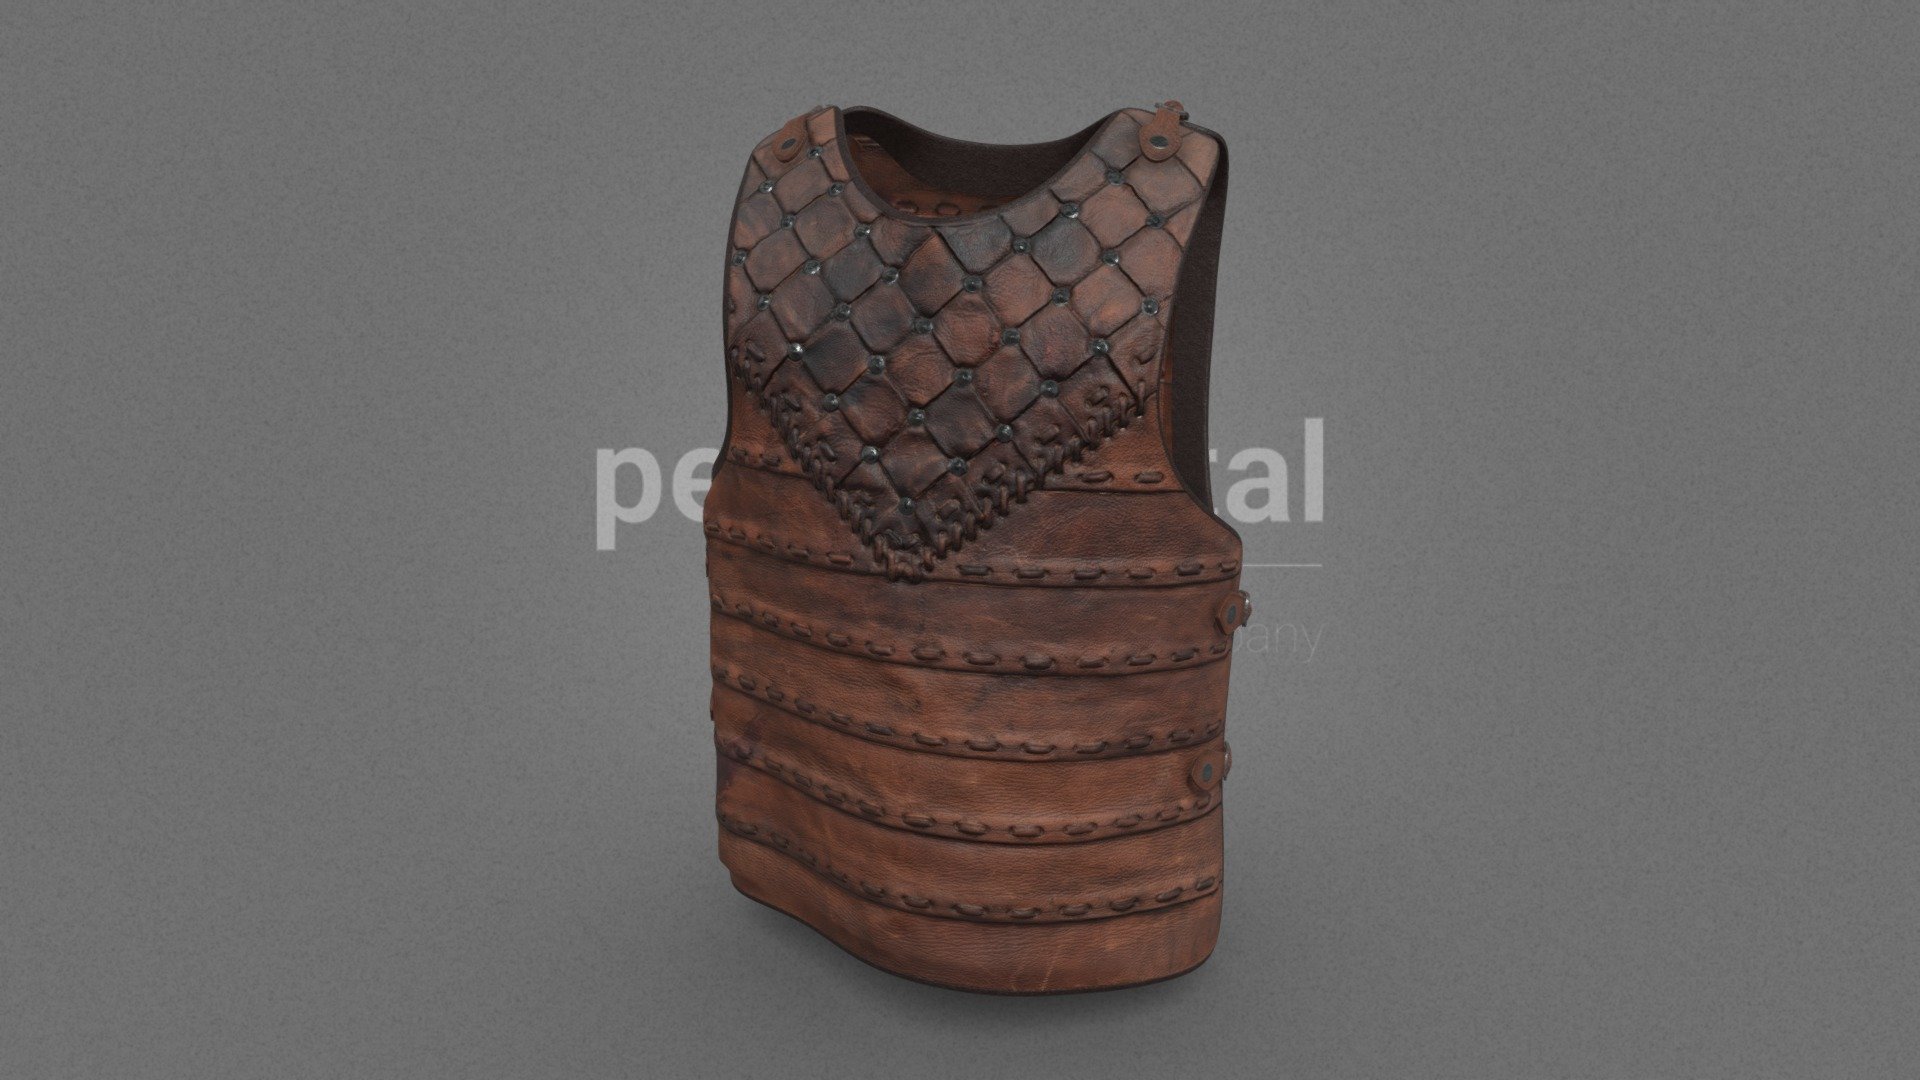 Leather cuirass armor

They are optimized for use in medium/high poly 3D scenes and optimized for rendering, positioned for you to include and adjust your own character.
We have included in Additional Files, the texture maps in high resolution, and the Blender file to edit any aspect of the set.
Enjoy it!

Don’t find what you need? Look to our immense stock of real costumes: periscostumes.com/en/our-stock/. 
Make your selection, send it to us, and we will scan it for you. Contact us and ask for a demo at info@peris.digital

Web: https://peris.digital/ - Leather Cuirass 06 - Buy Royalty Free 3D model by Peris Digital (@perisdigital) 3d model